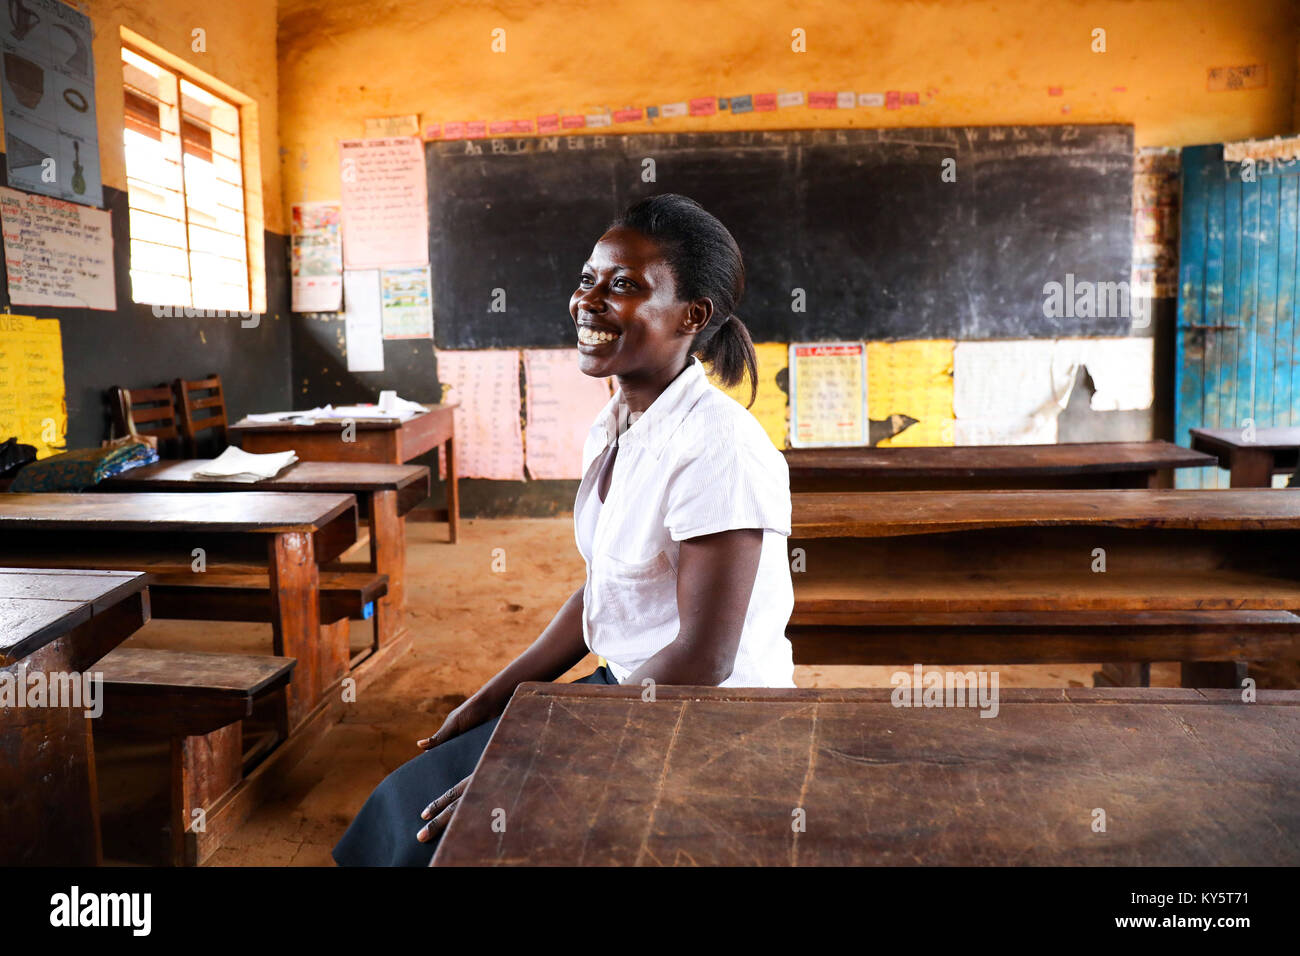 Lamwo. 13th Jan, 2018. Nagudi Stella, a primary school teacher from Mbale, Uganda. Women are the beating heart of Africa. They are the blood that keeps this country alive. During the LRA war women in Uganda were abused, denied education, and deprived of their human dignity. In the past 10 years, these women have become educated, independent, and empowered. Overcoming economic and financial issues, they are an inspiration and modern day success story. Empowering the women of Uganda is essential to the success of this developing country. Through education and technical training, these women Stock Photo